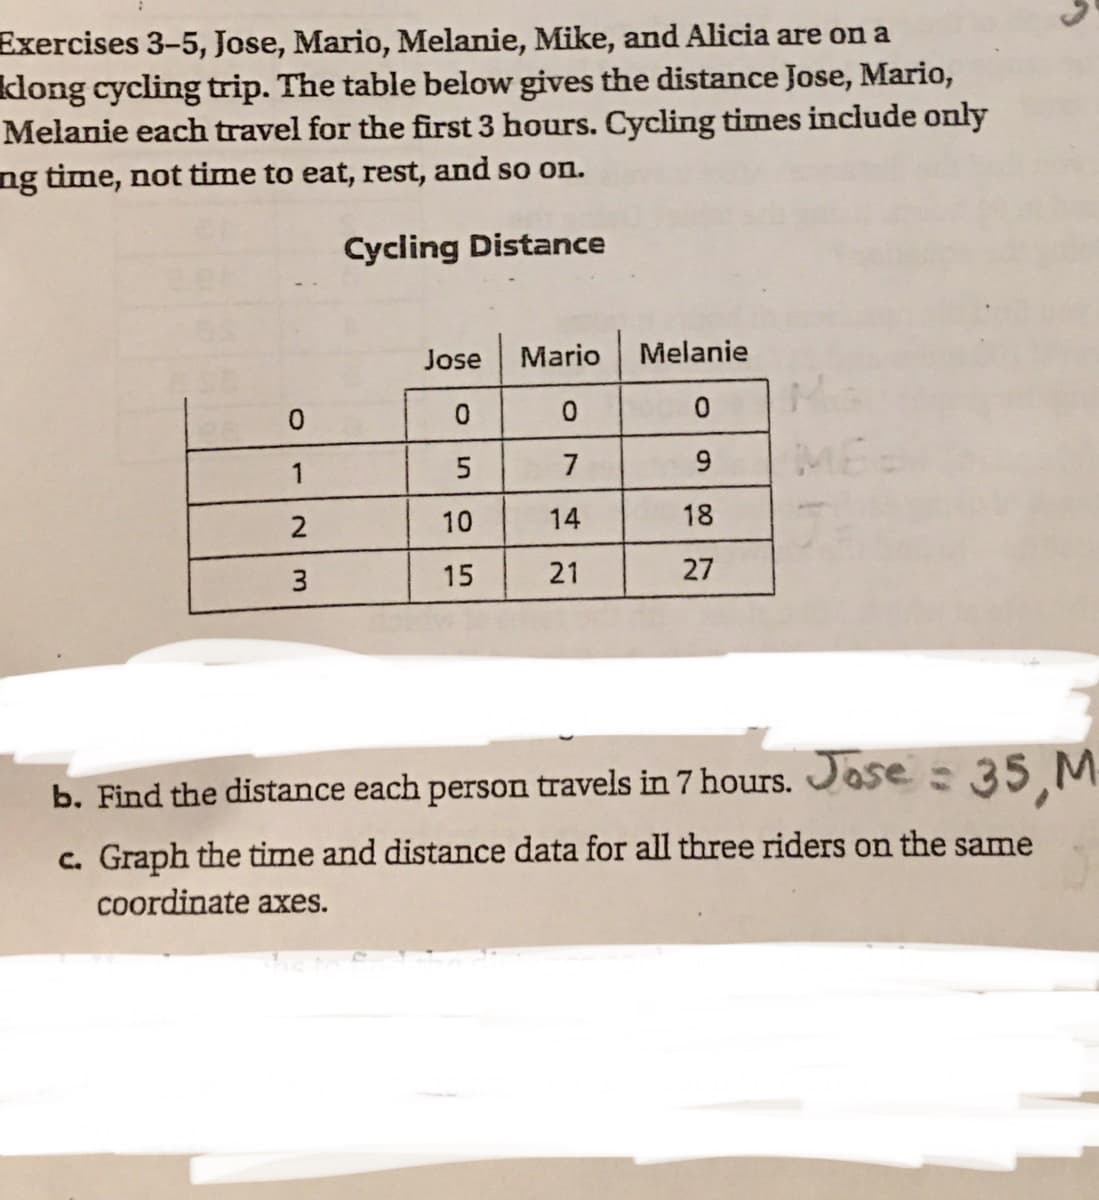 Exercises 3-5, Jose, Mario, Melanie, Mike, and Alicia are on a
dong cycling trip. The table below gives the distance Jose, Mario,
Melanie each travel for the first 3 hours. Cycling times include only
ng time, not time to eat, rest, and so on.
Cycling Distance
Jose
Mario
Melanie
ME
1
5
7
2
10
14
18
3
15
21
27
b. Find the distance each person travels in 7 hours. Jose = 35 M
c. Graph the time and distance data for all three riders on the same
coordinate axes.
